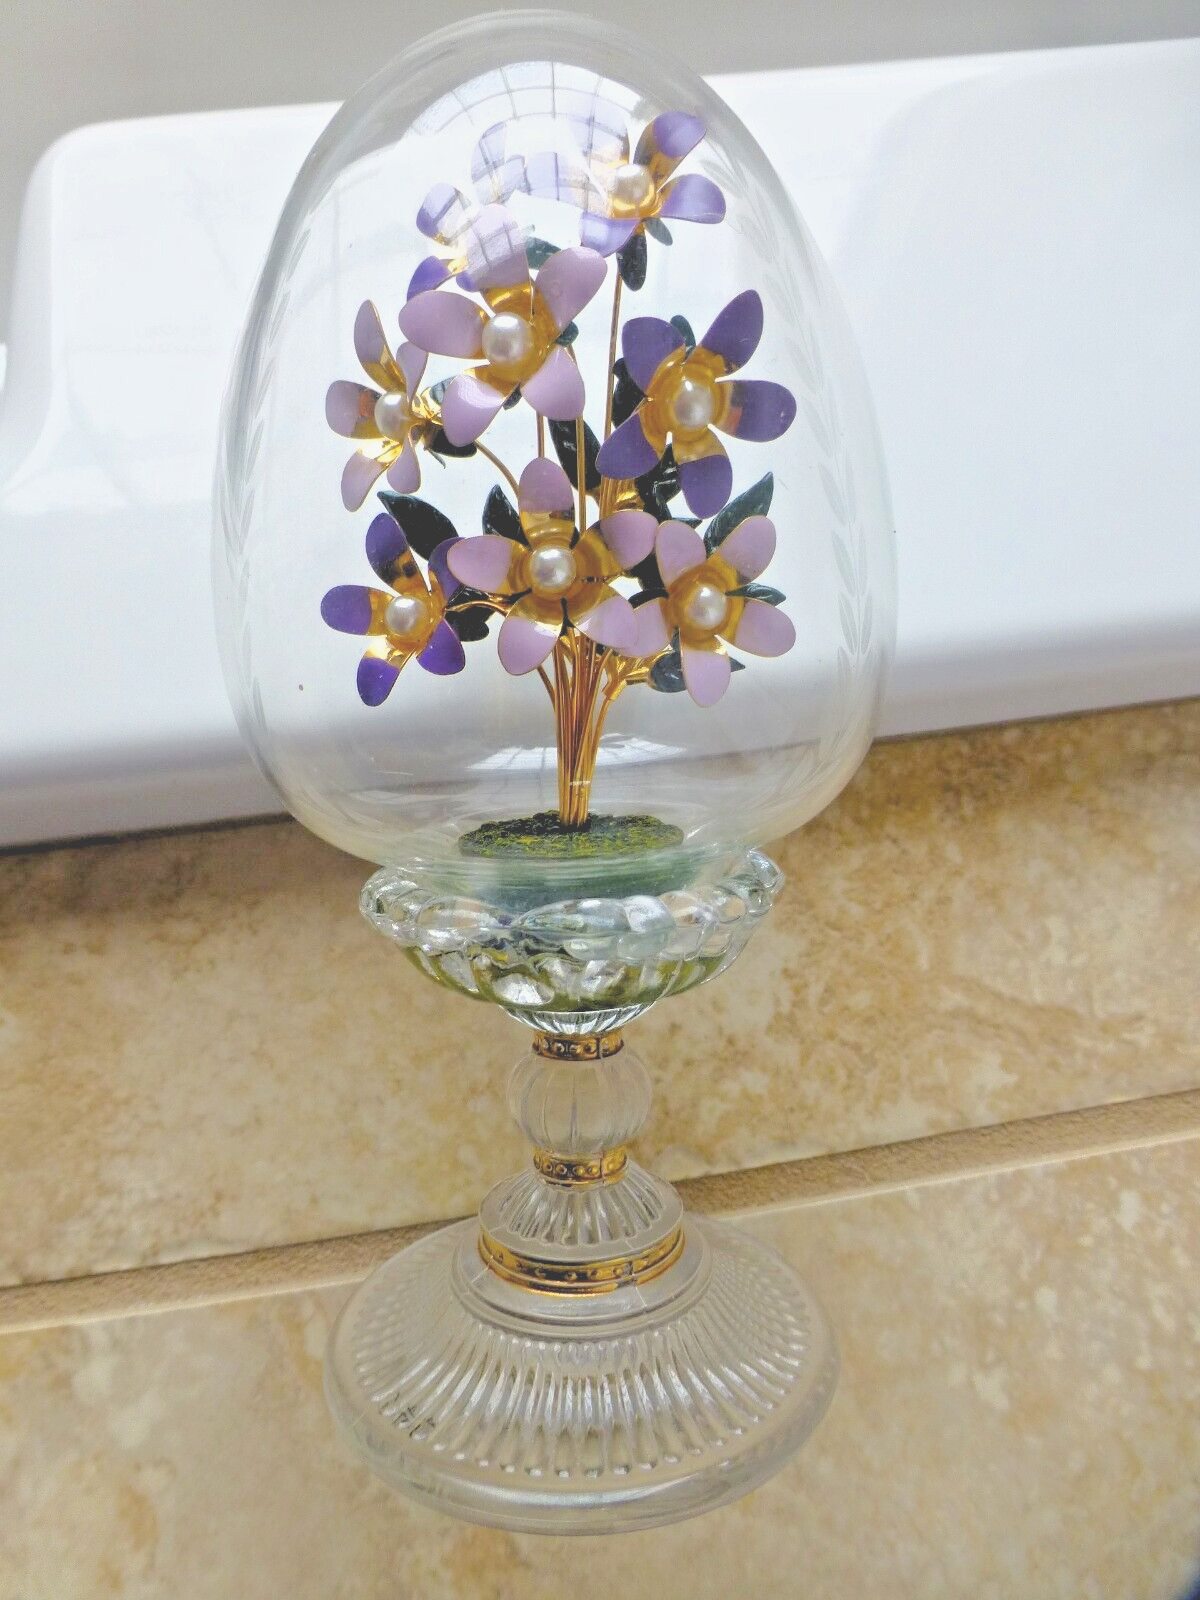 Franklin Mint Footed Faberge Etched Glass Egg Purple Flowers Pearl Centers Gold